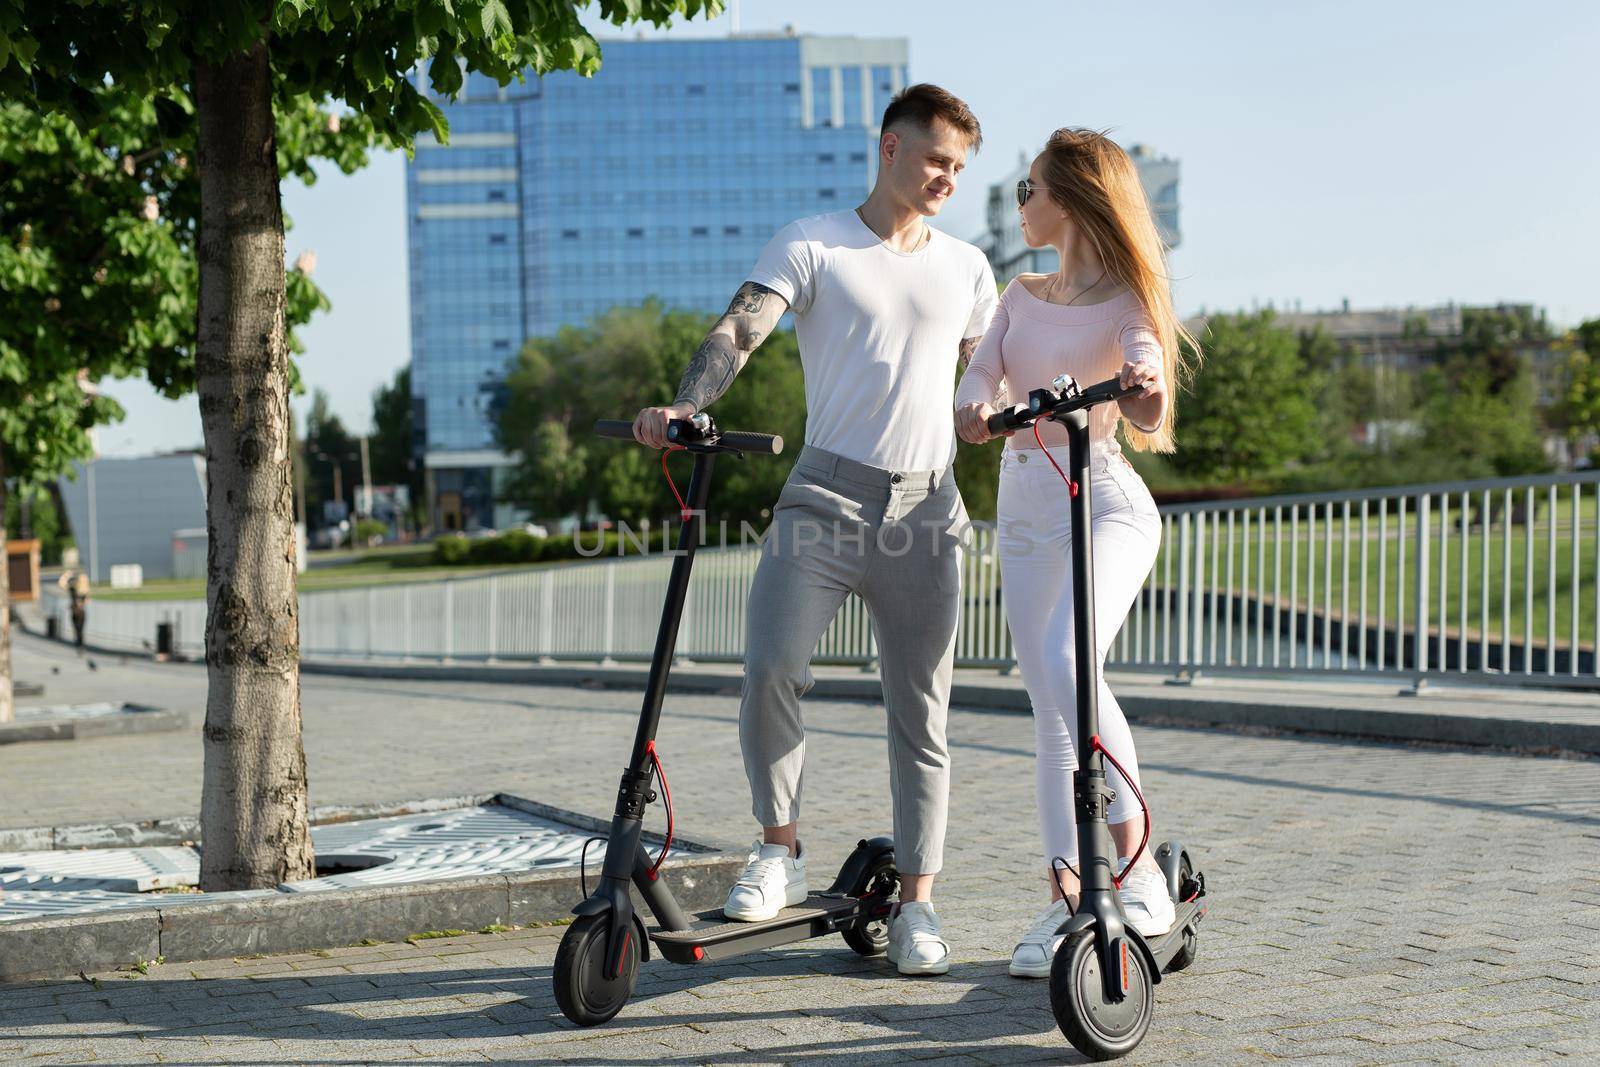 An attractive pair of lovers ride electric scooters and look at each other